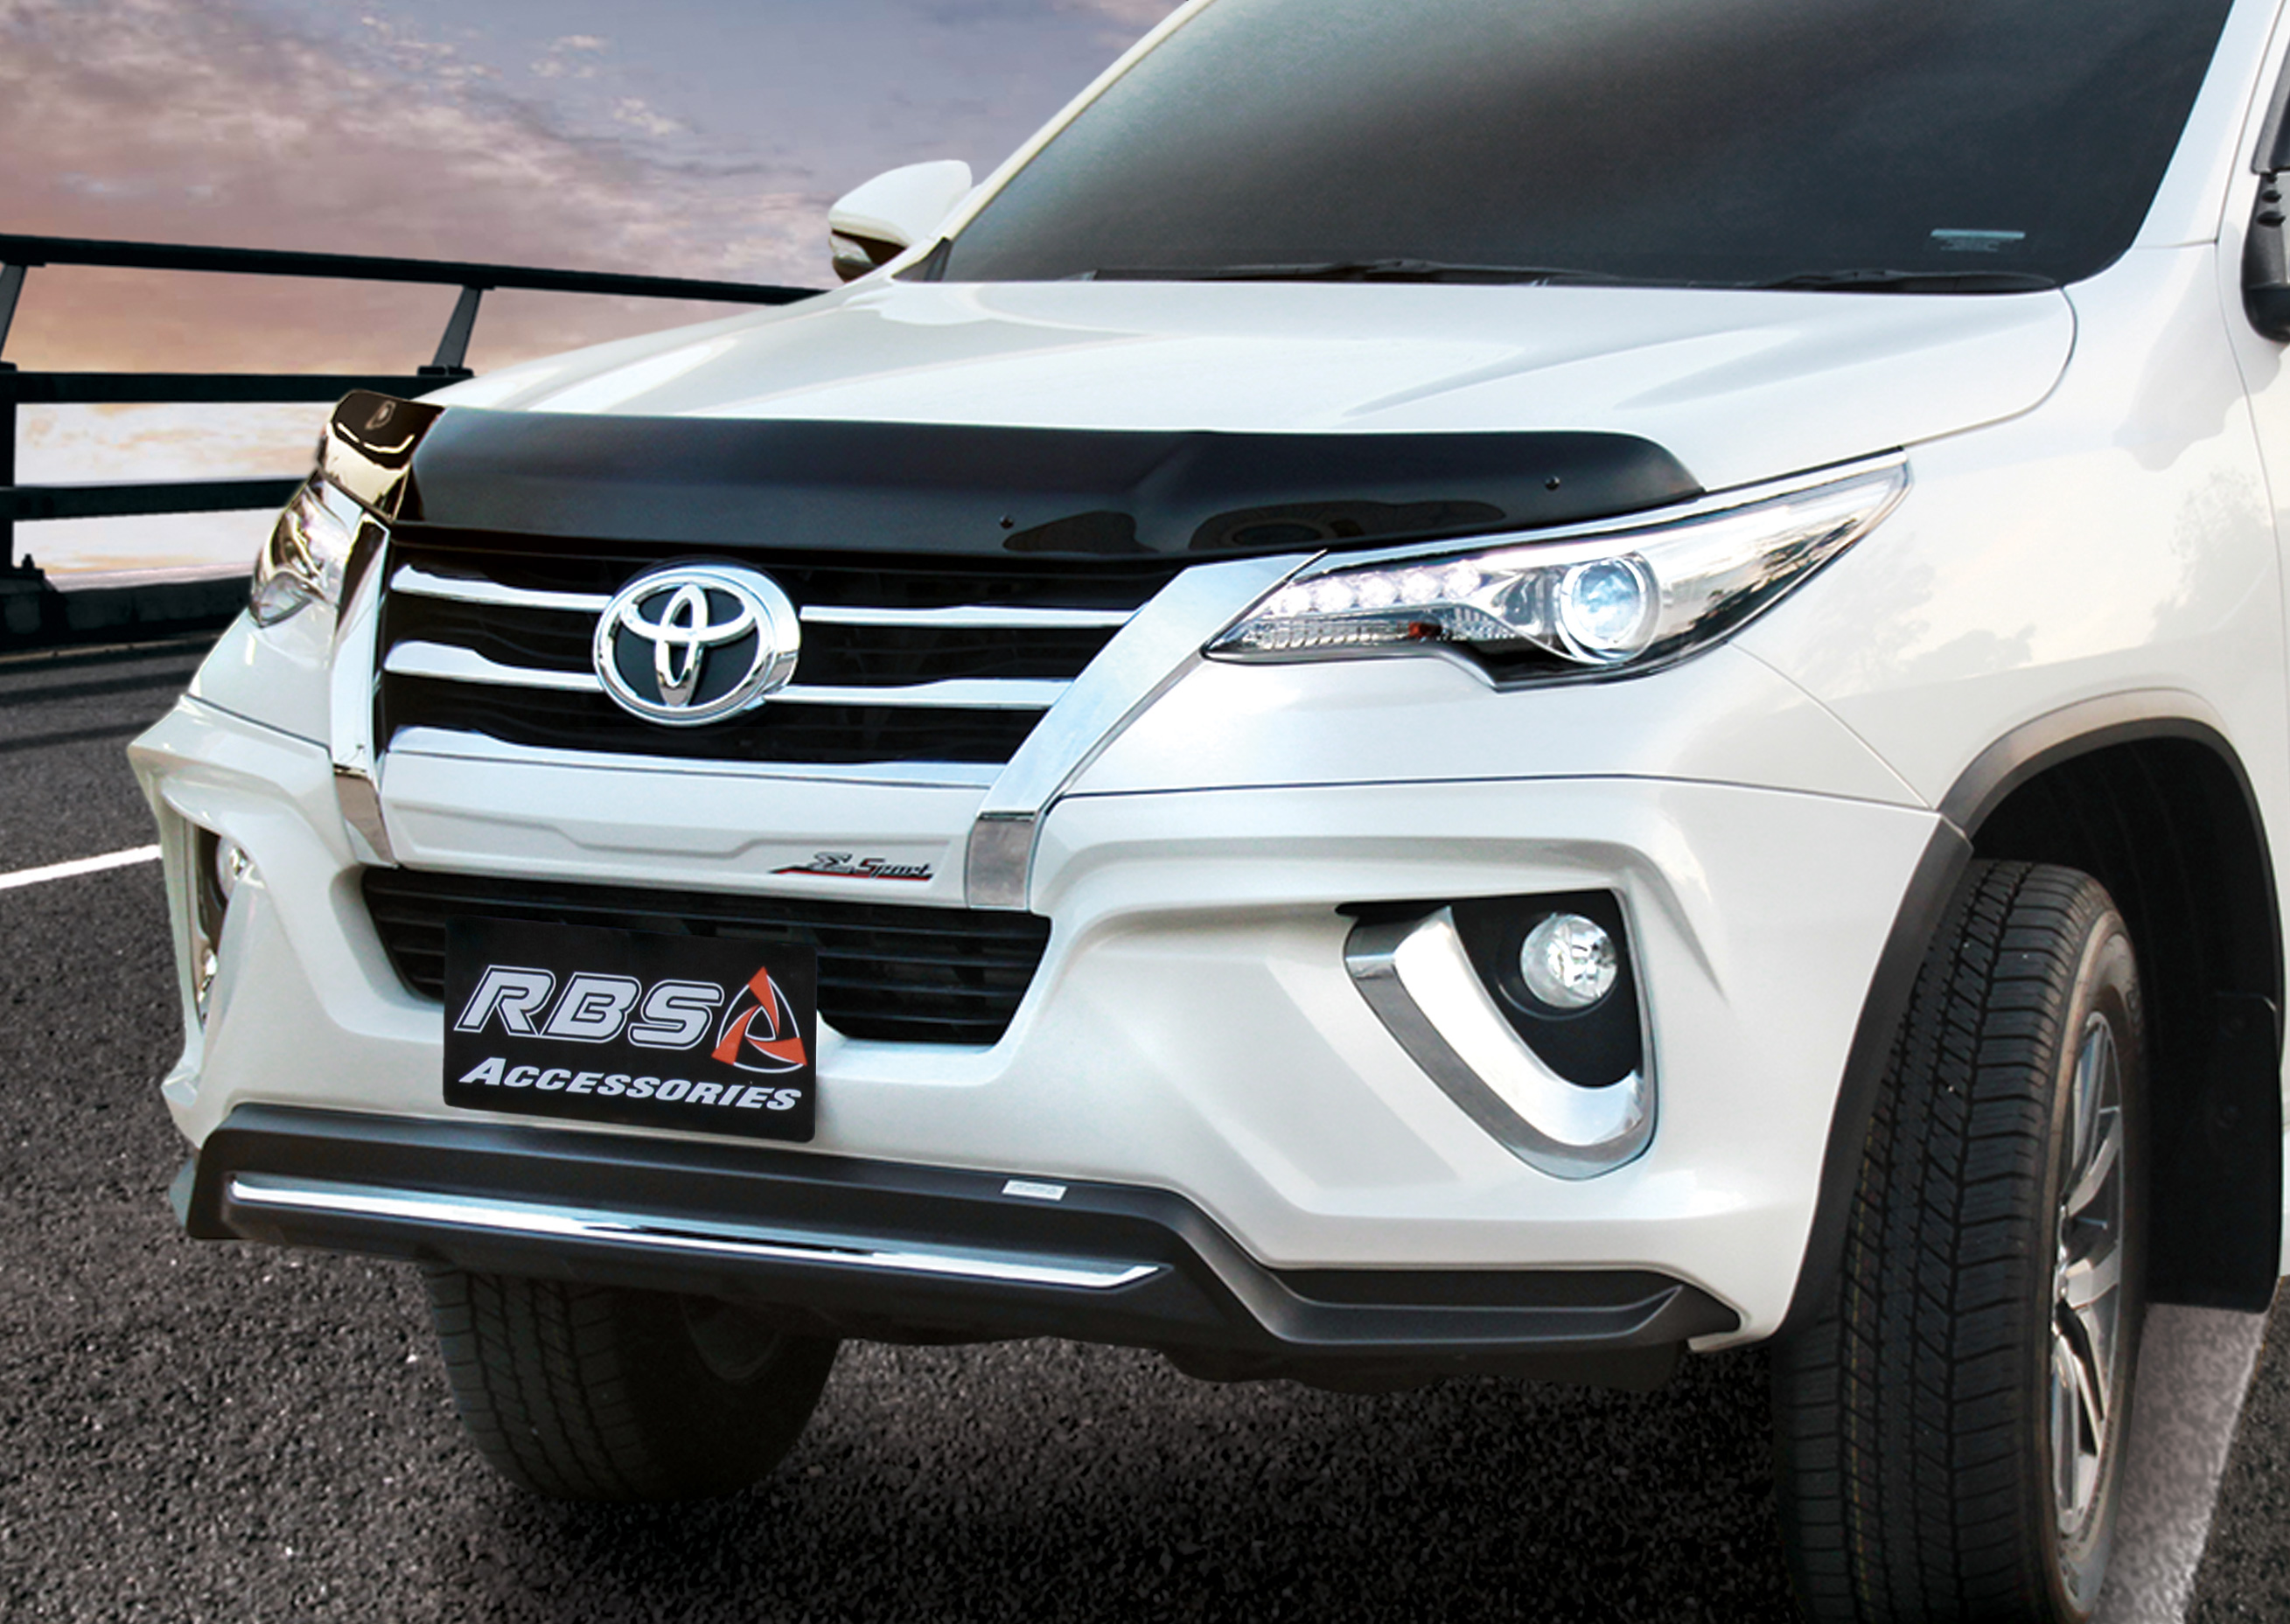 Body Kits RBS cho Fortuner